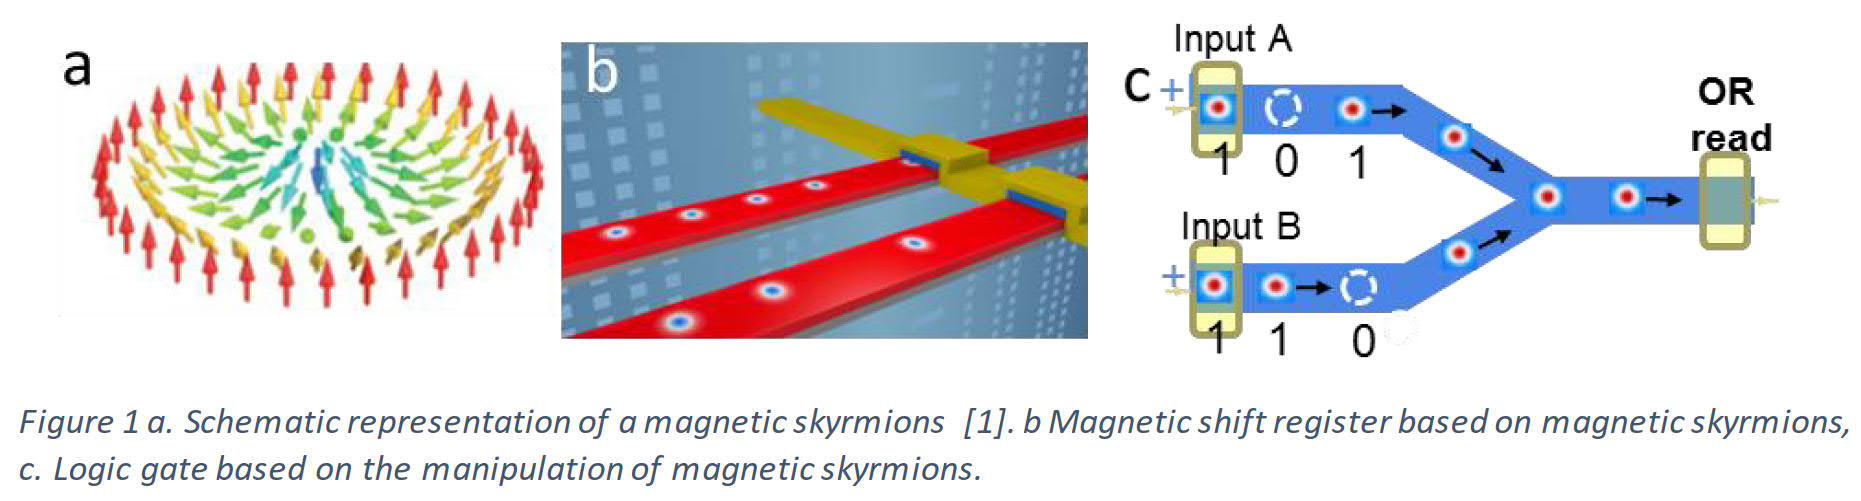 Post-doctoral position - Spintronic devices based on magnetic skyrmions